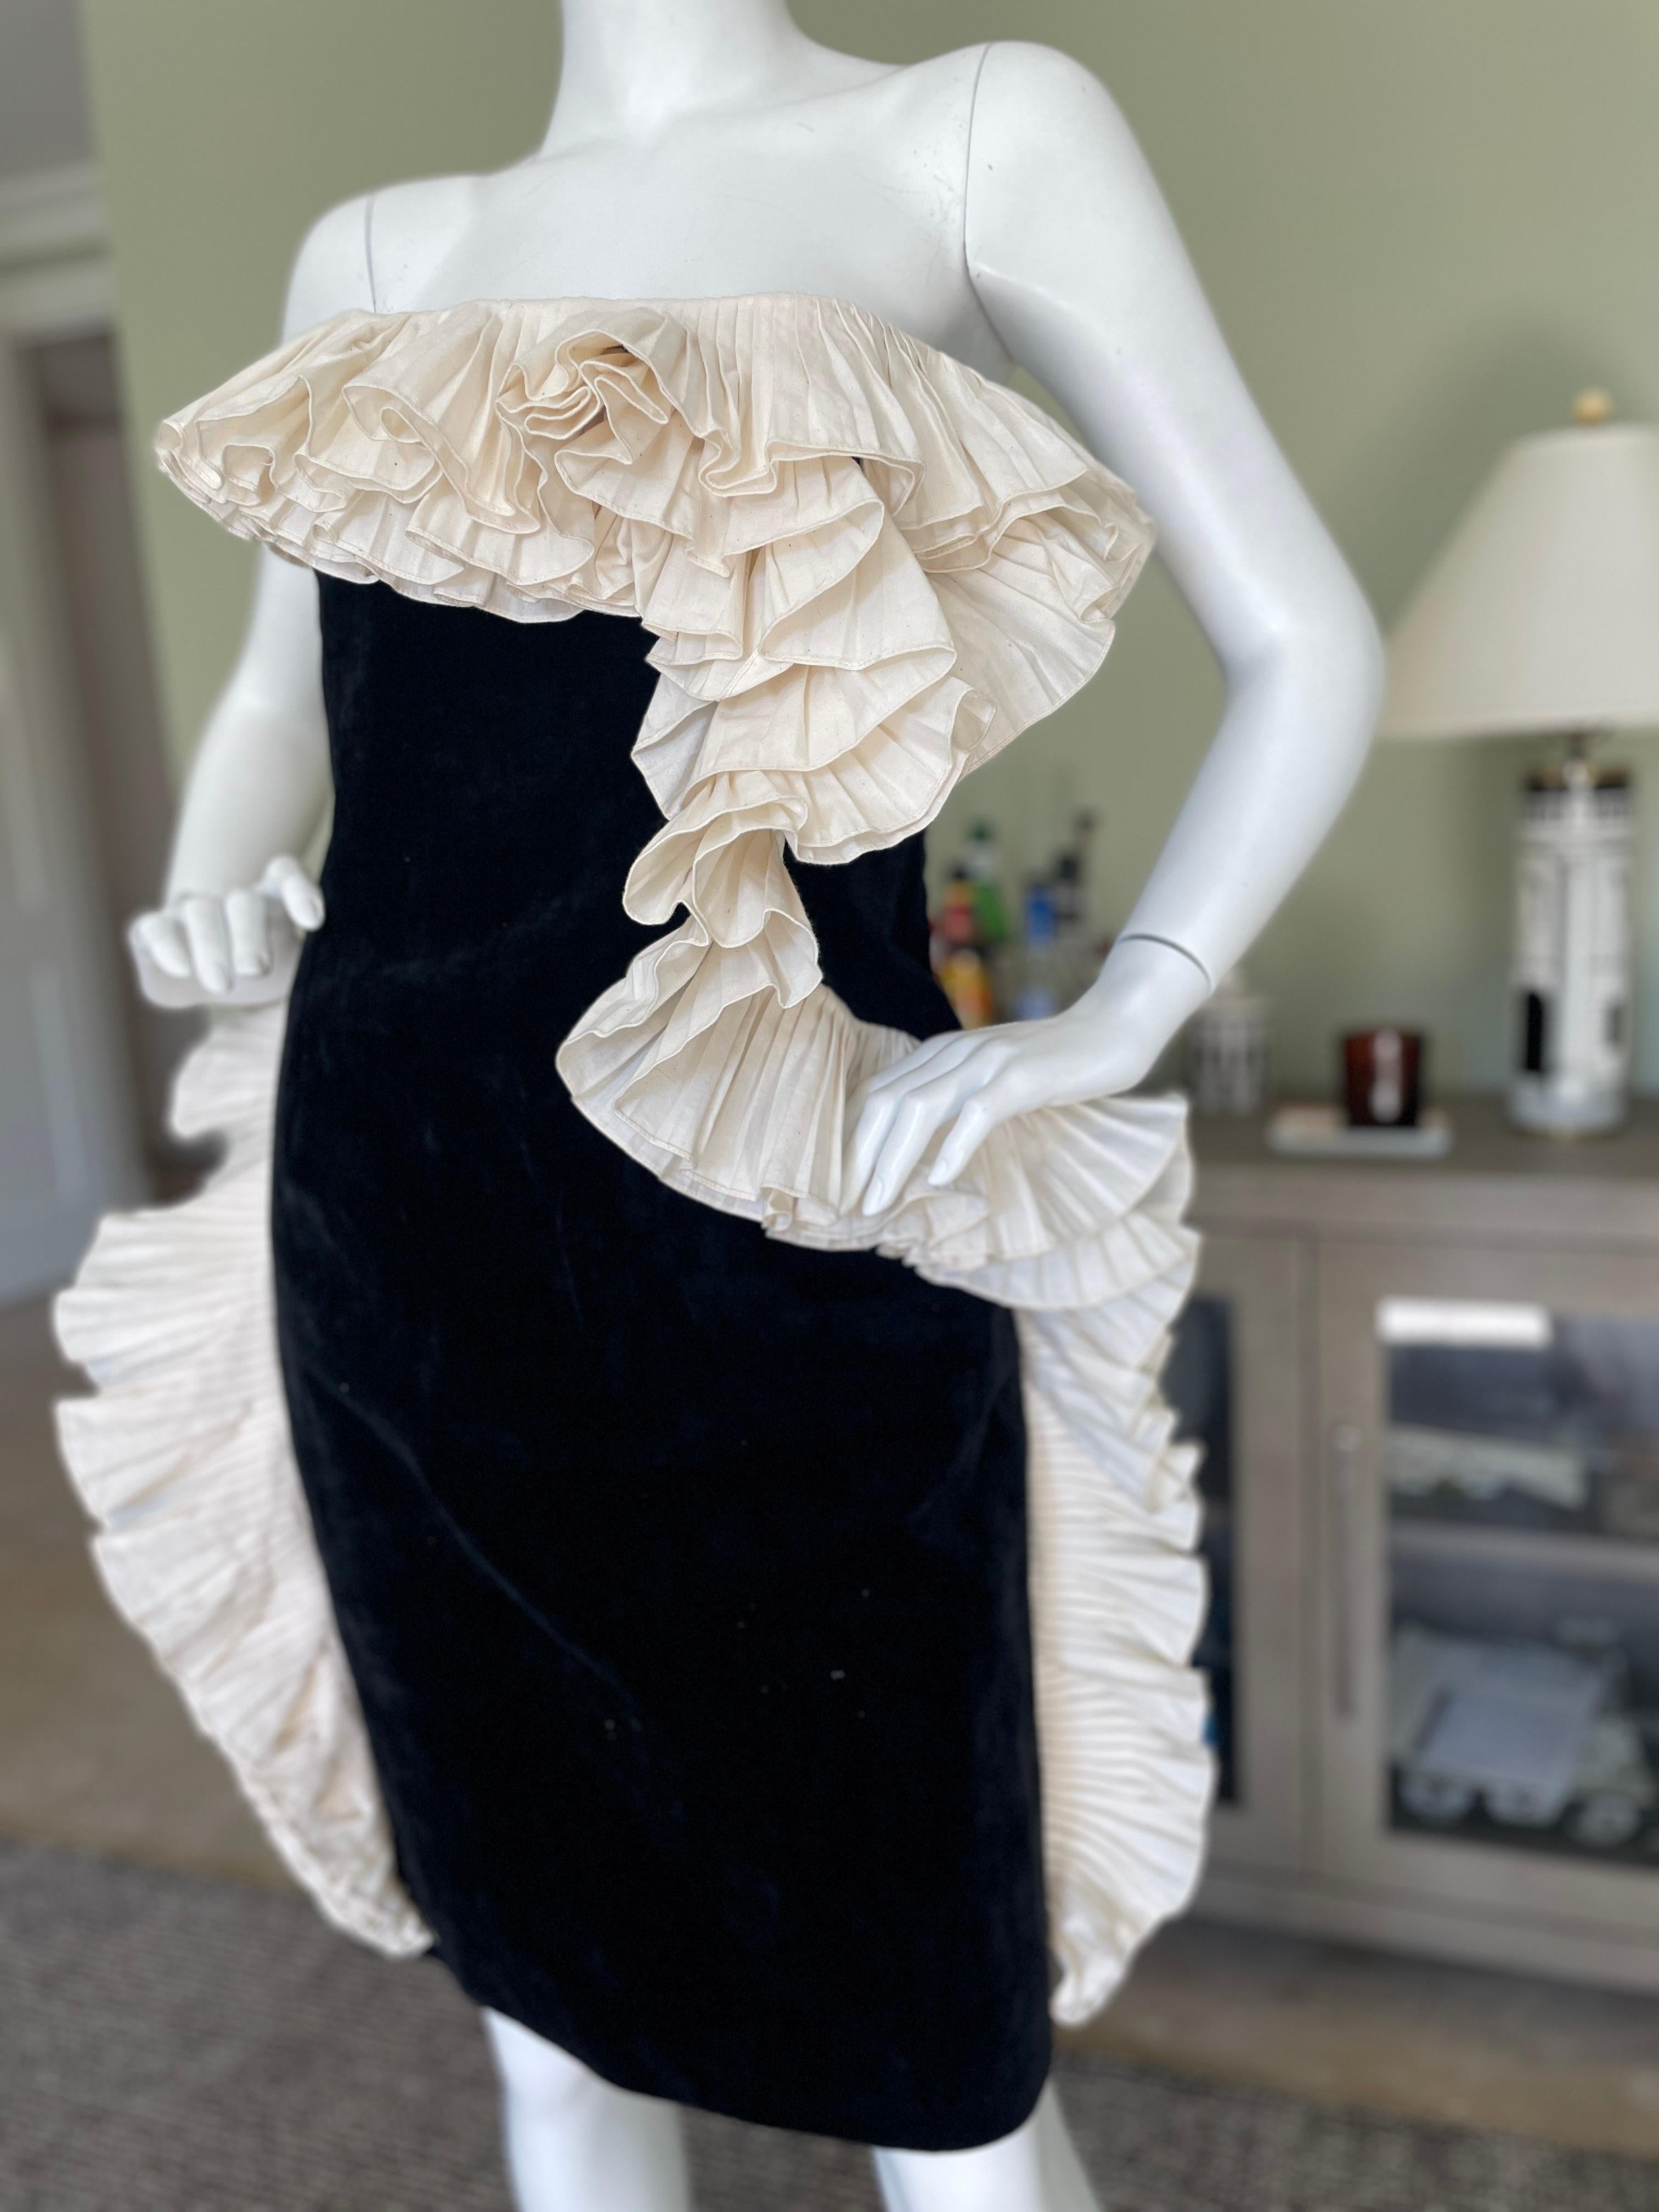 Lanvin by Alber Elbaz Black Velvet Dress w Dramatic White Ruffle from Fall 2012 In Good Condition For Sale In Cloverdale, CA